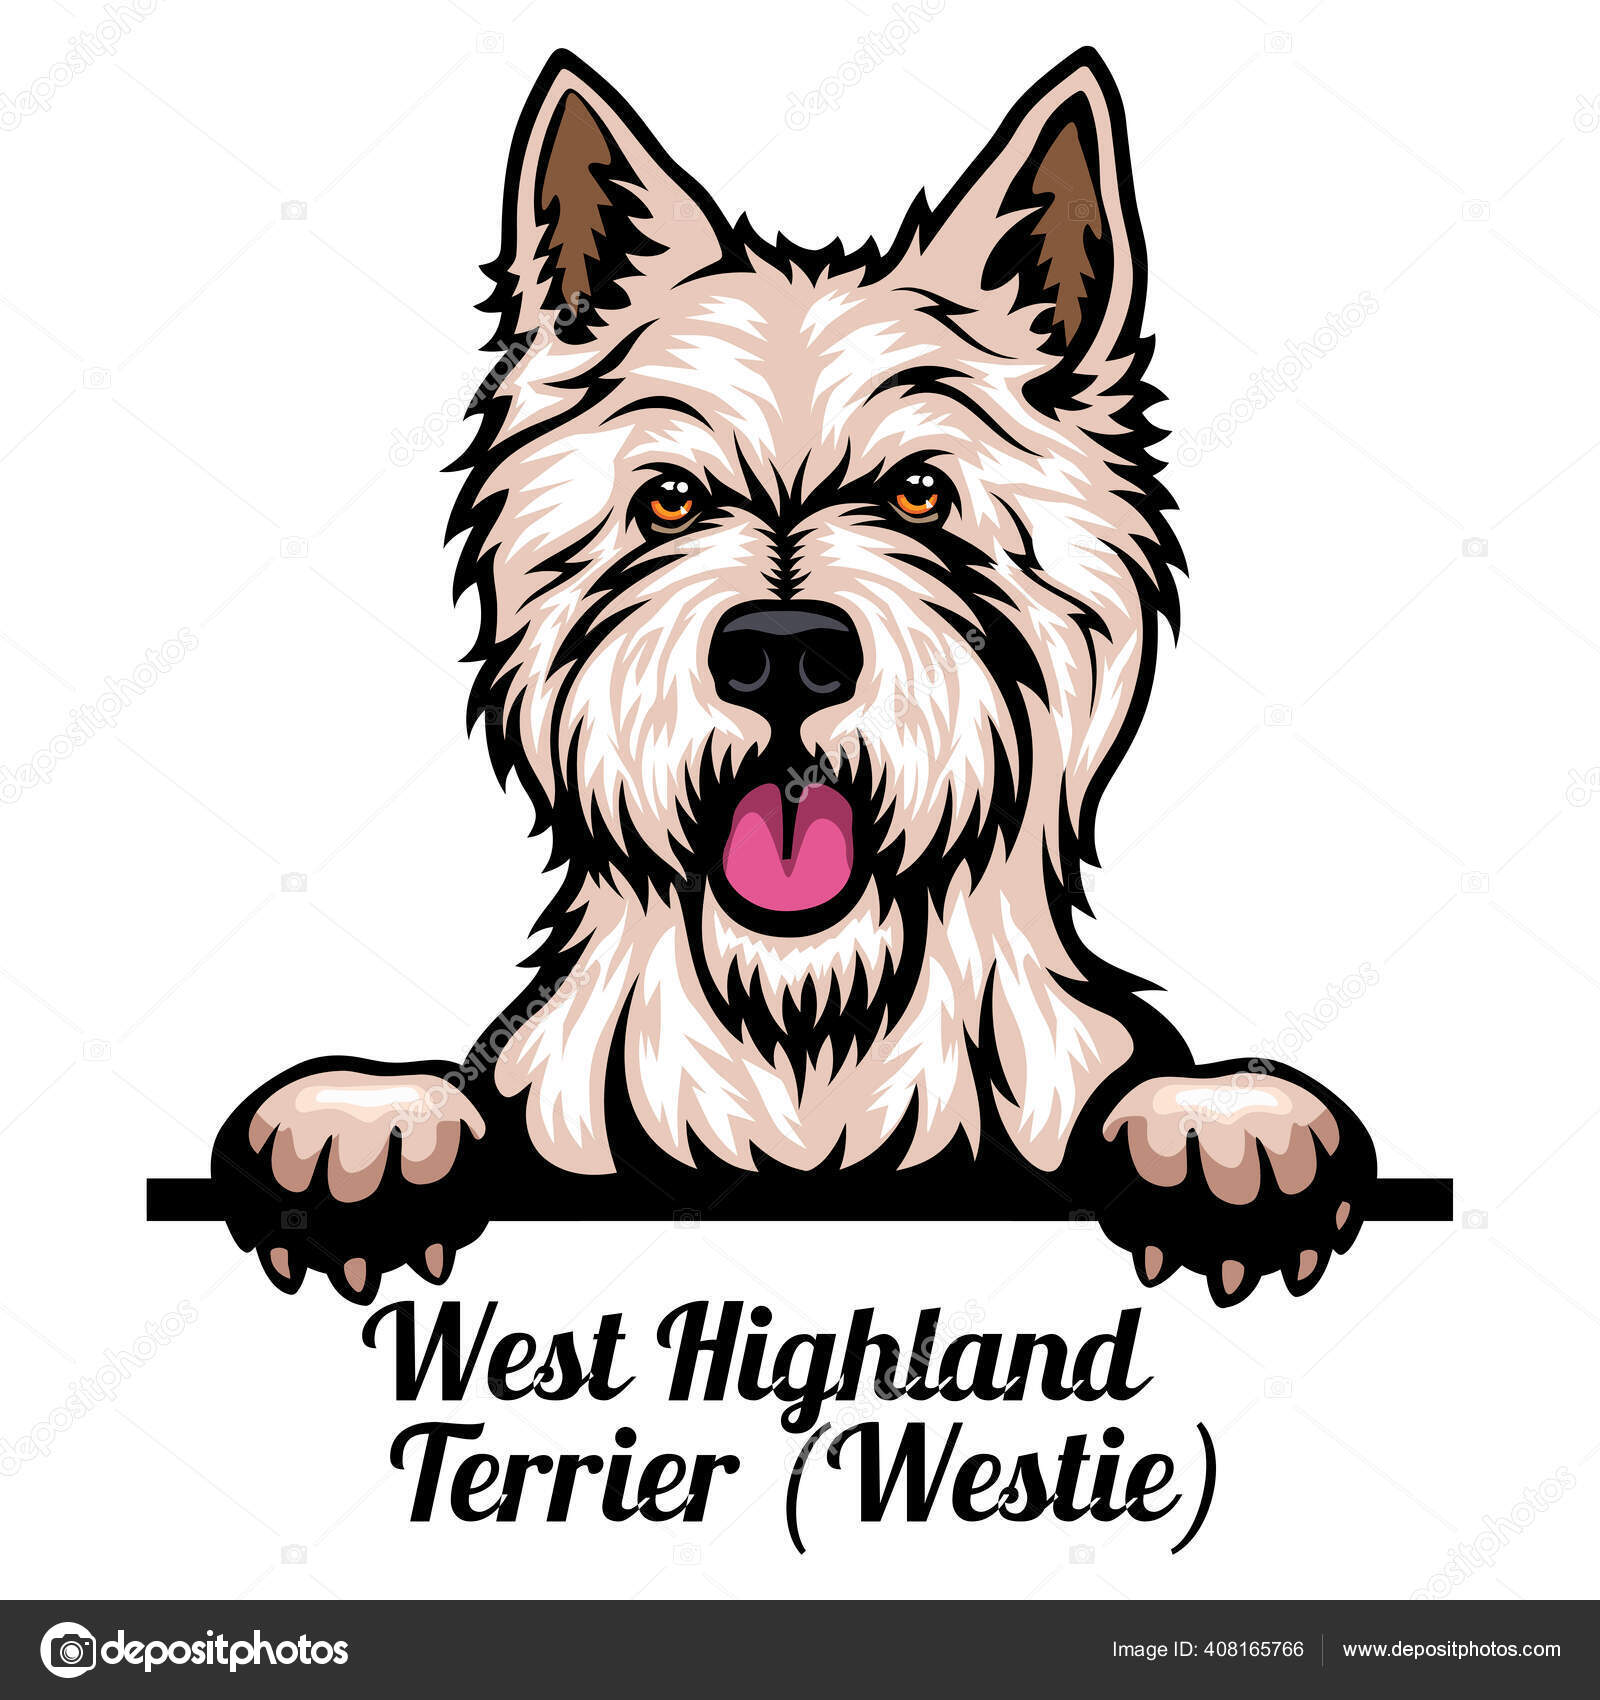 Head West Highland White Terrier Dog Breed Color Image Of A Dogs Head Isolated On A White Background Vector Image By C Digital Clipart Vector Stock